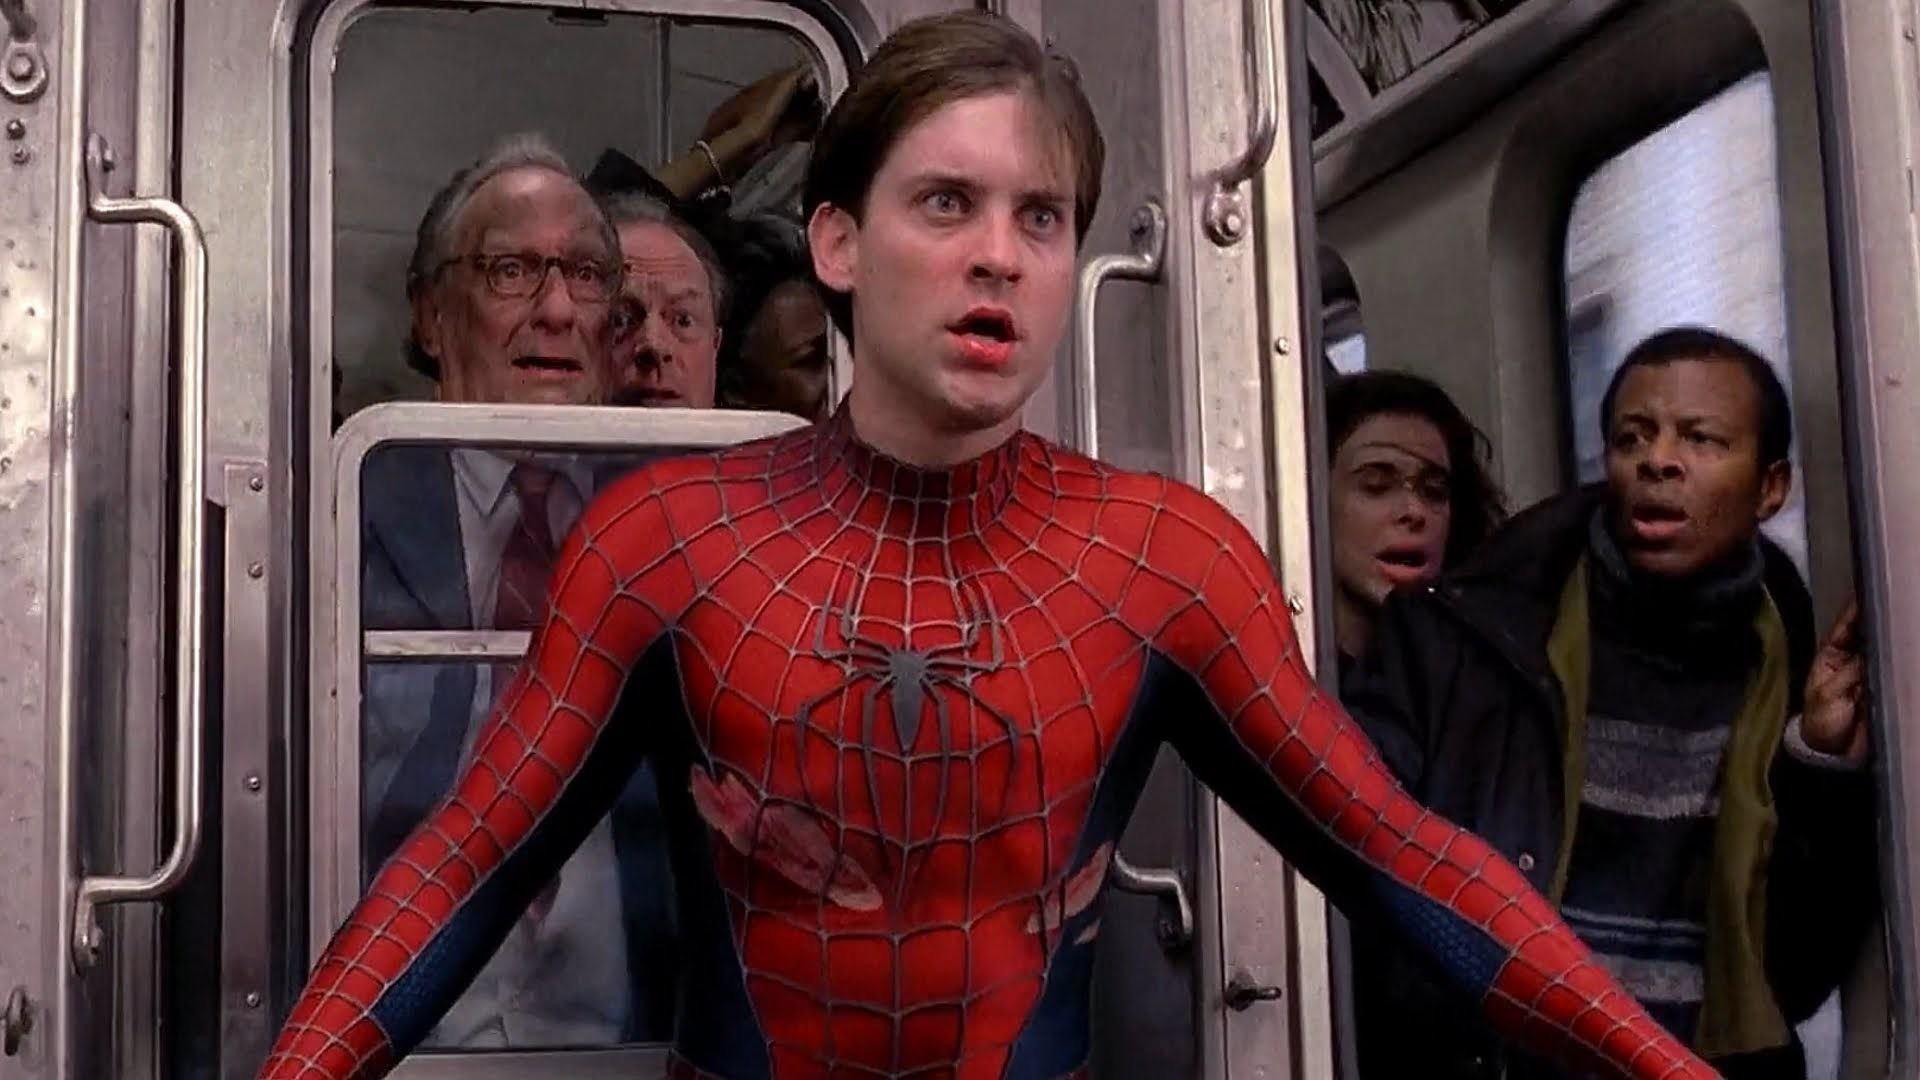 In a moment of crisis, Peter makes a necessary sacrifice. (Image: Sony Pictures)